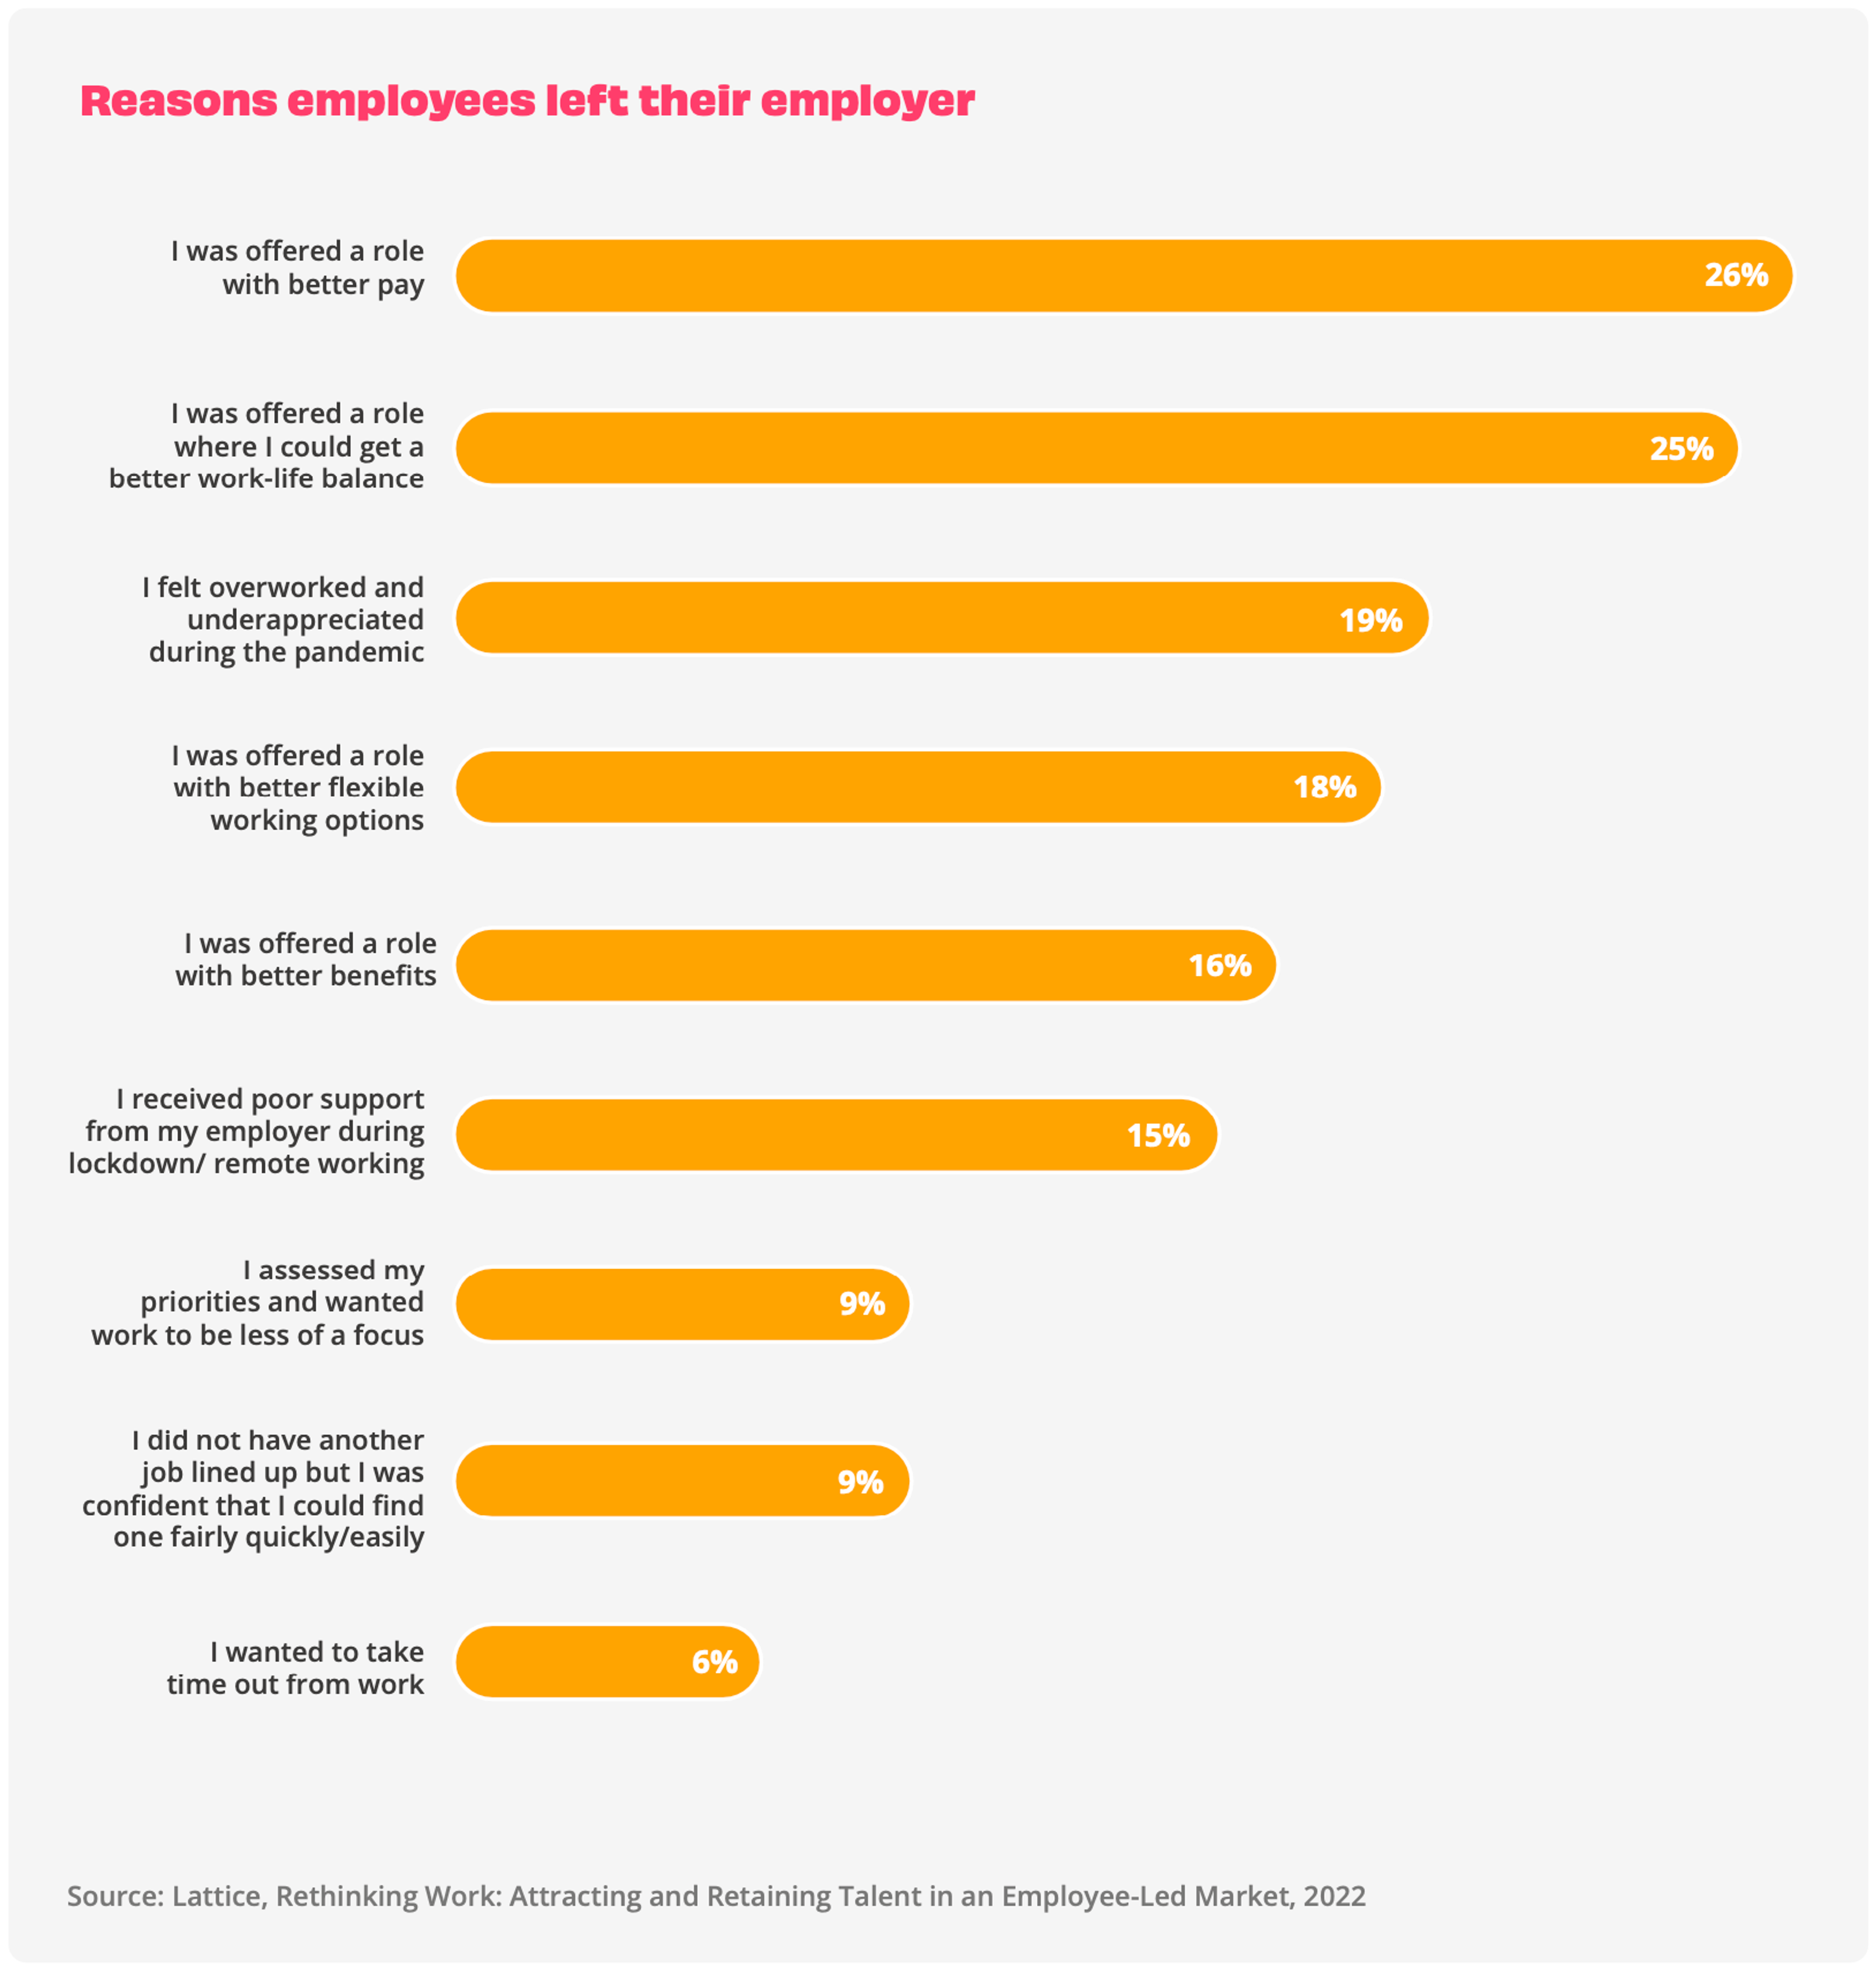 Bar chart showing reasons why employees left their employer